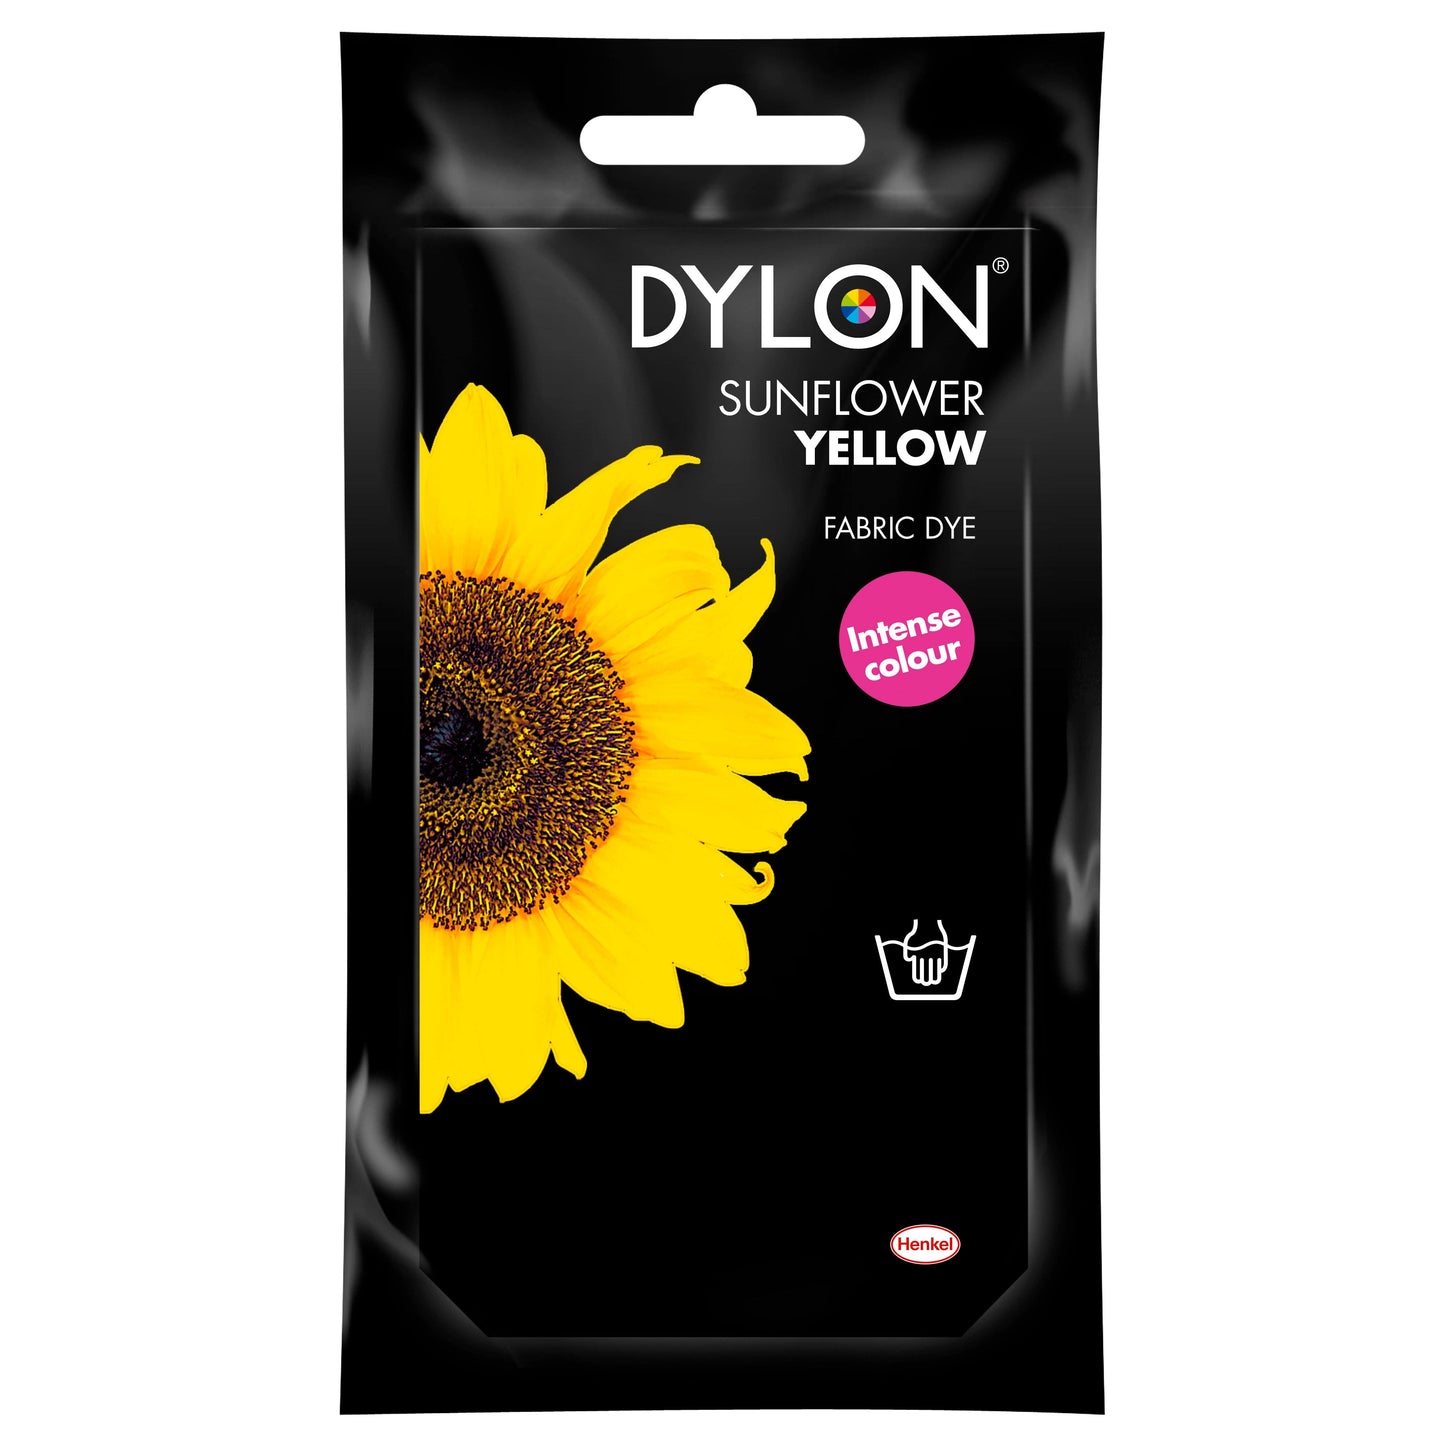 Dylon Hand Dye for Fabric in Sunflower Yellow